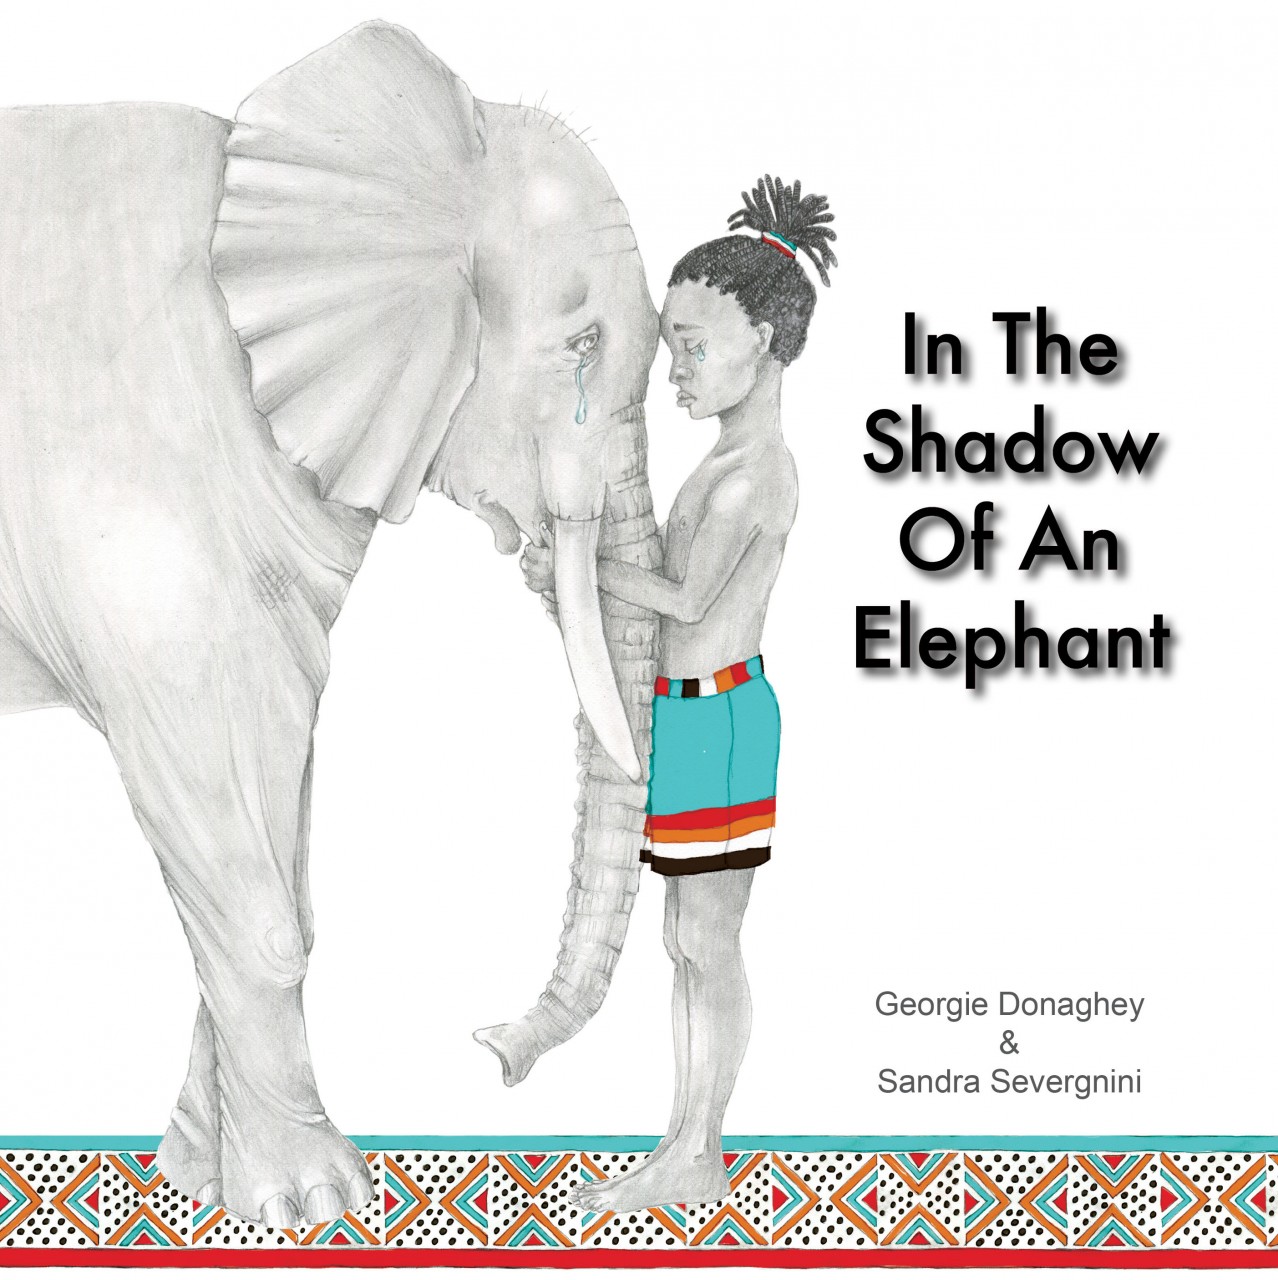 The Story Behind the Story - In the Shadow of an Elephant by Georgie Donaghey